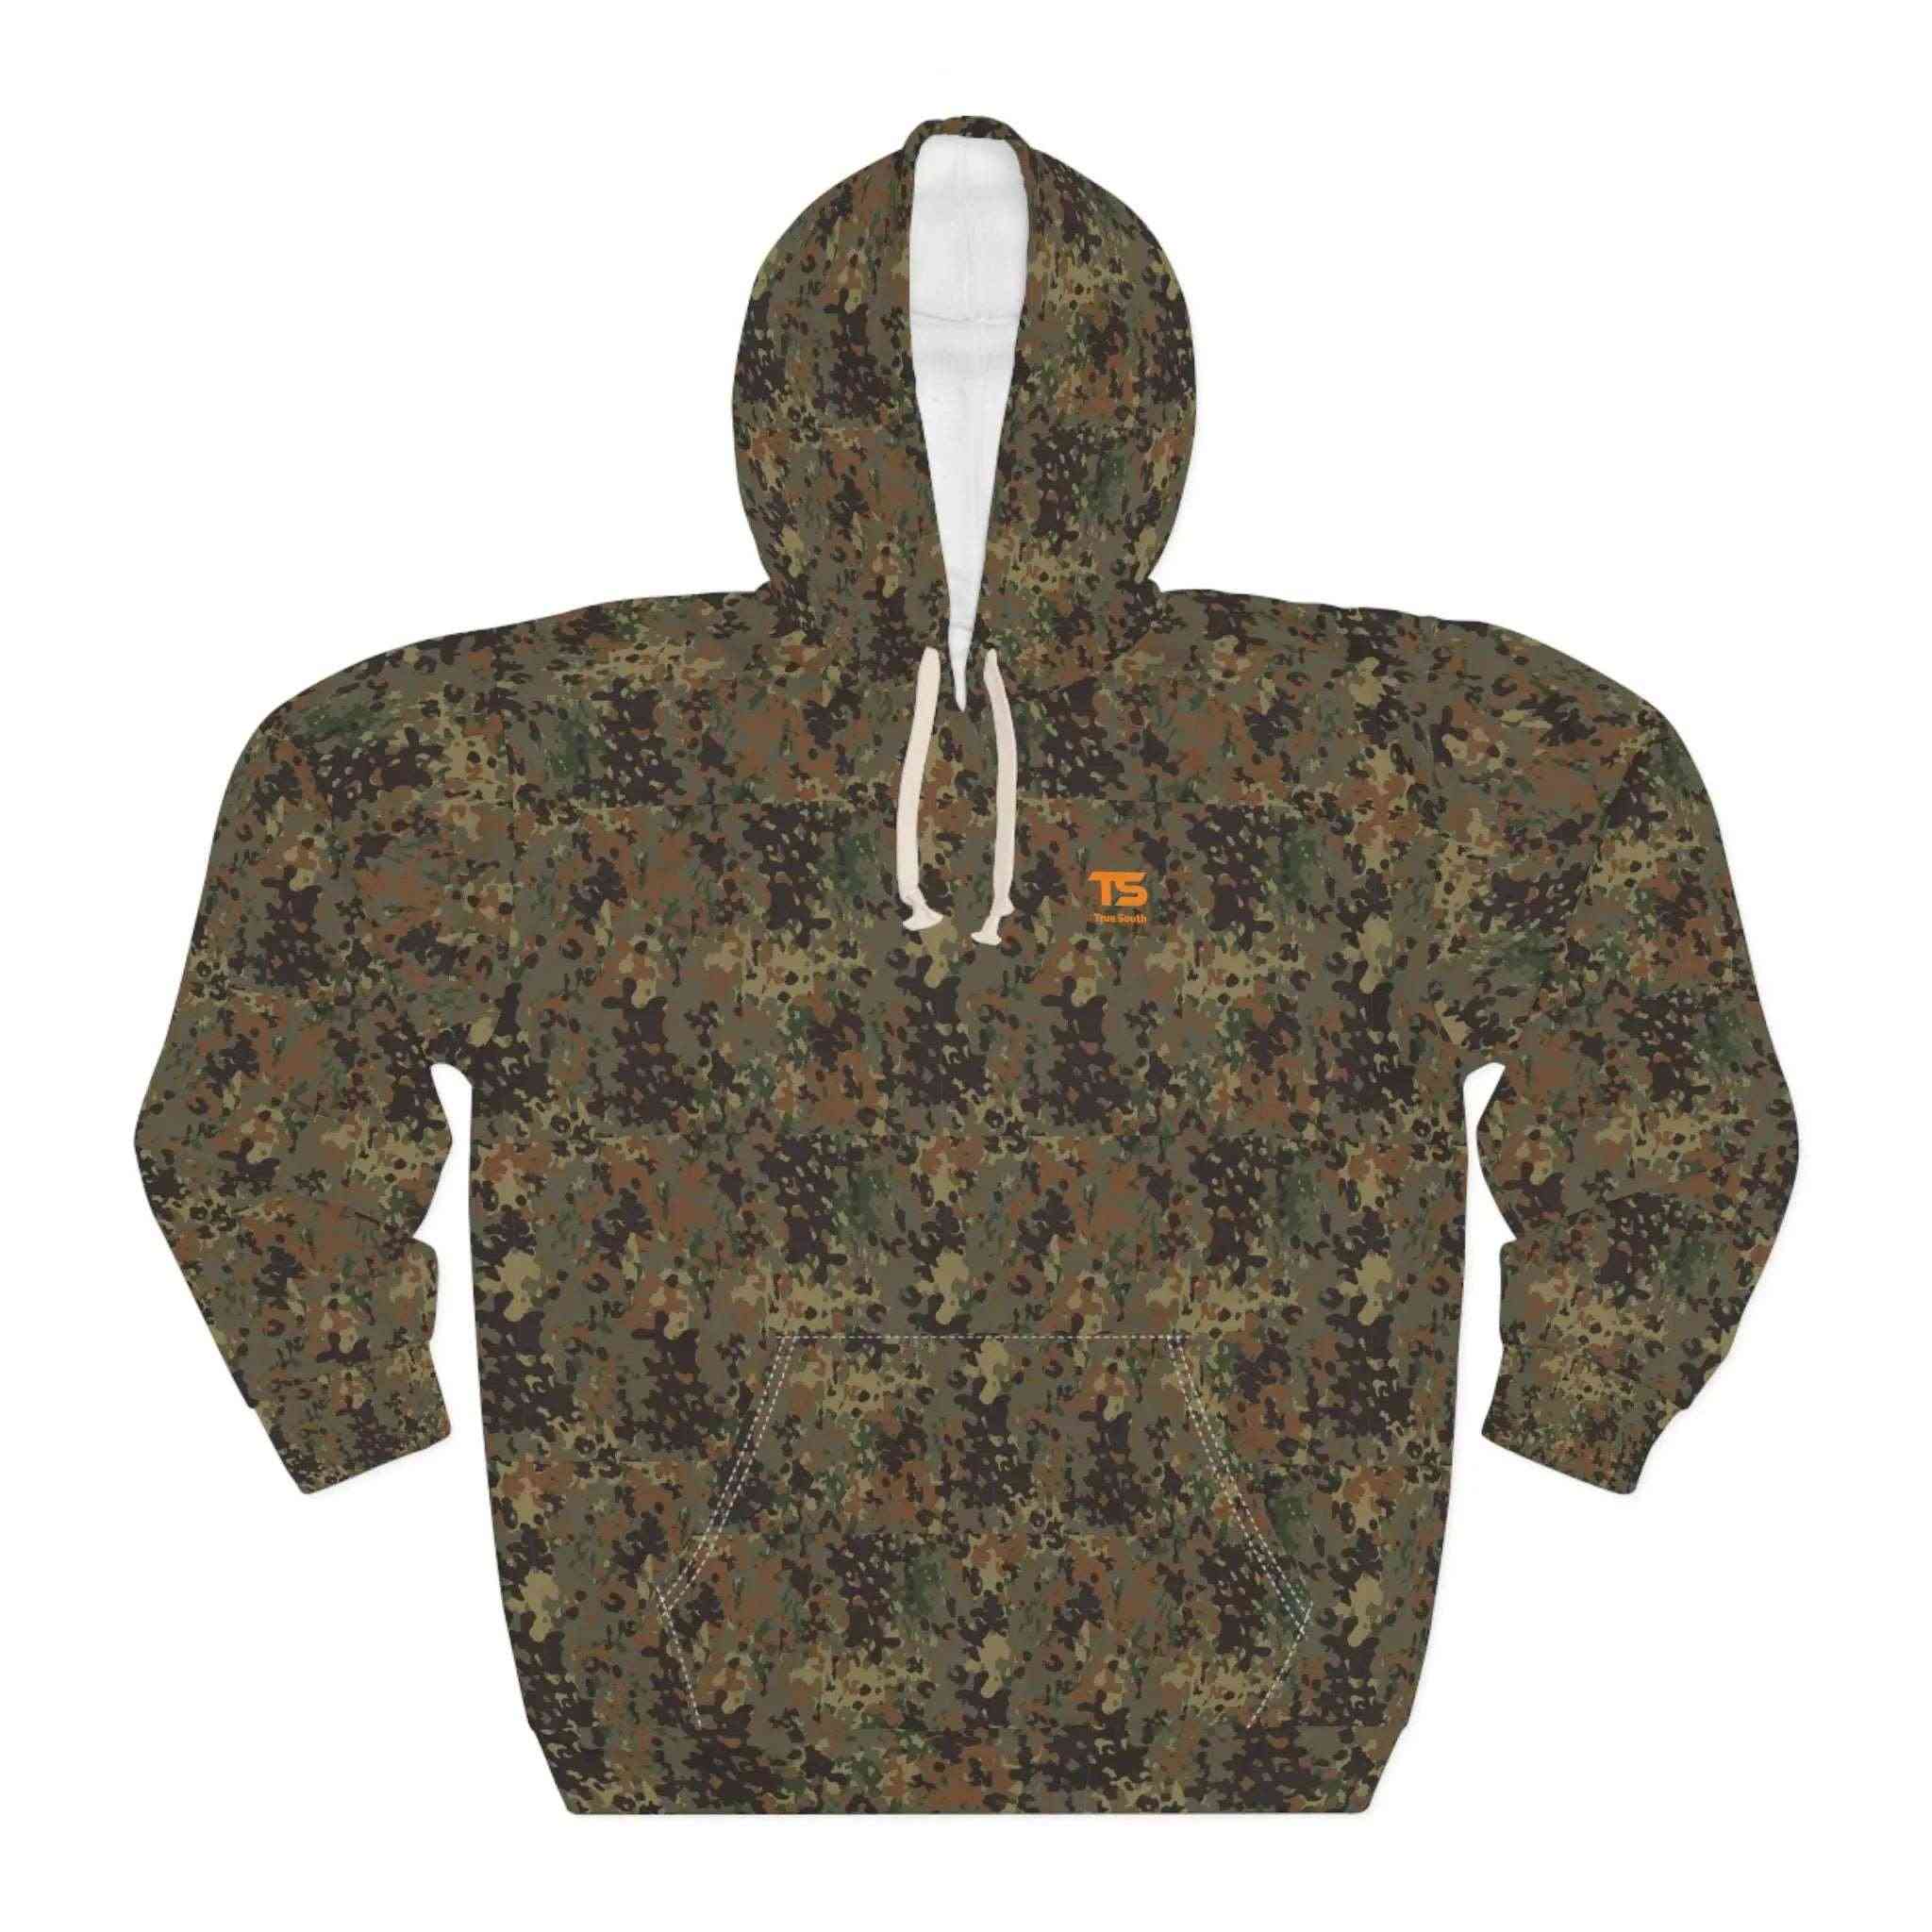 Southern Hunting Camo Hoodie: Gear Up for the Hunt in Style!